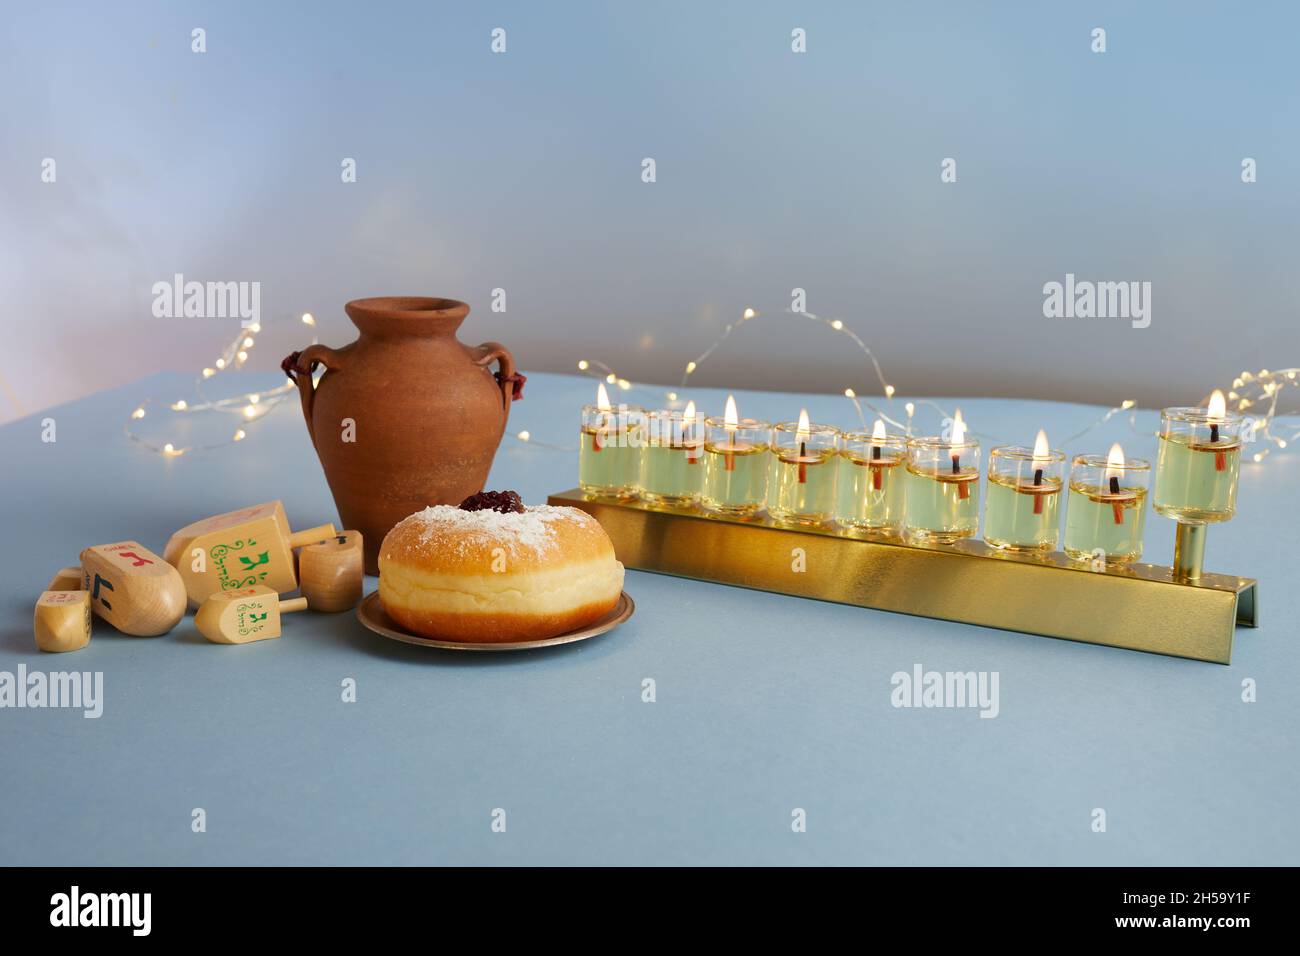 Jewish holiday Hanukkah background with menorah- traditional candelabra, spinning top and doughnut on blue background Stock Photo